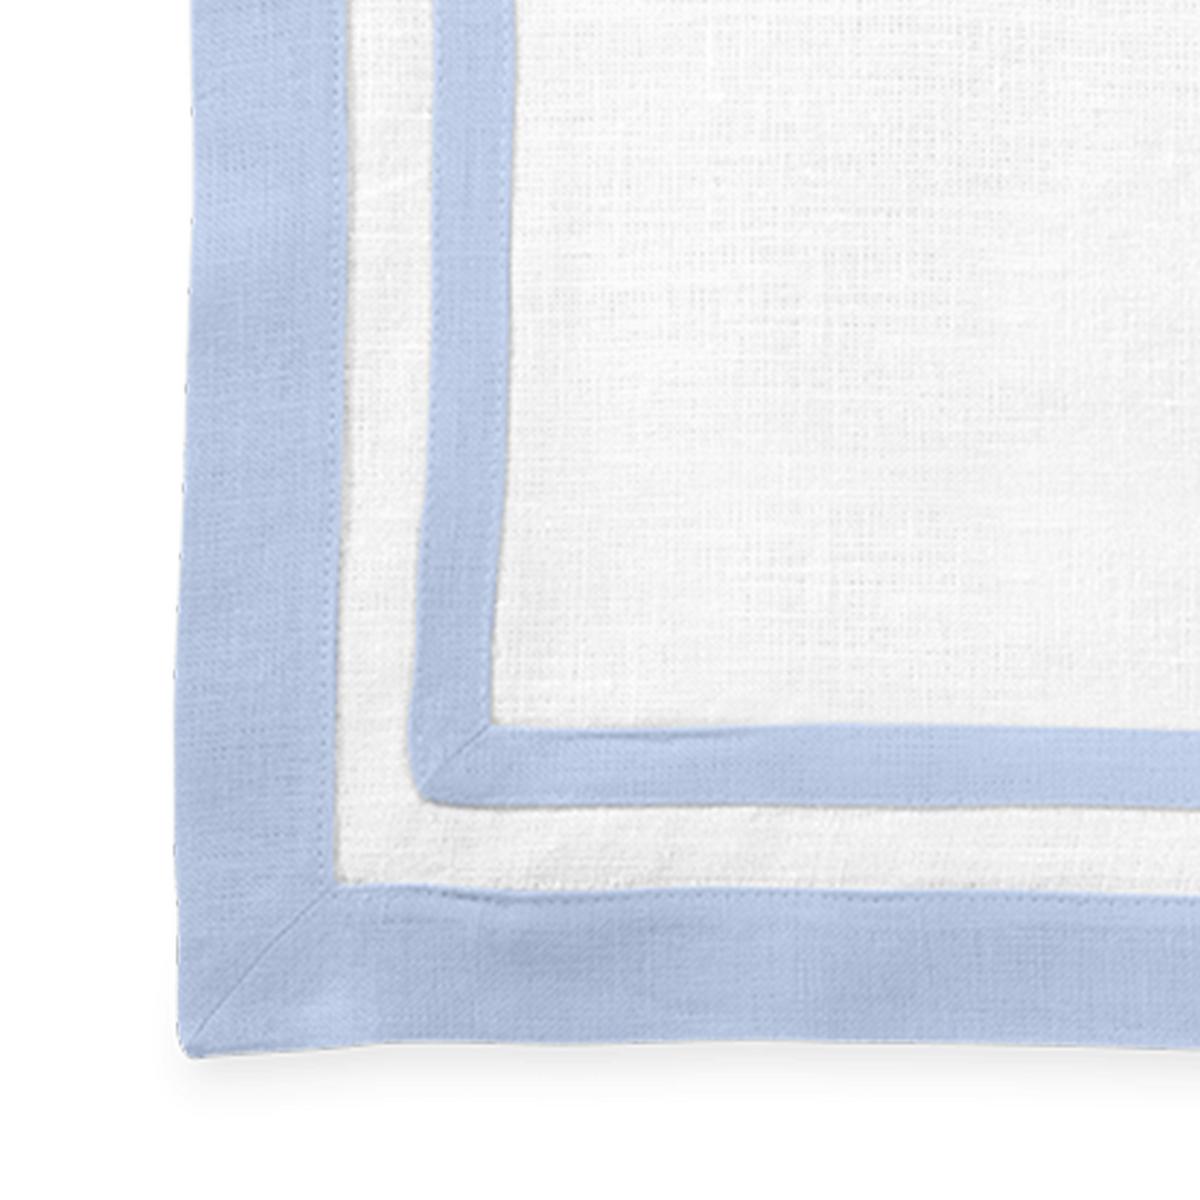 Swatch Sample of Matouk Double Border Placemats in Color Ice Blue